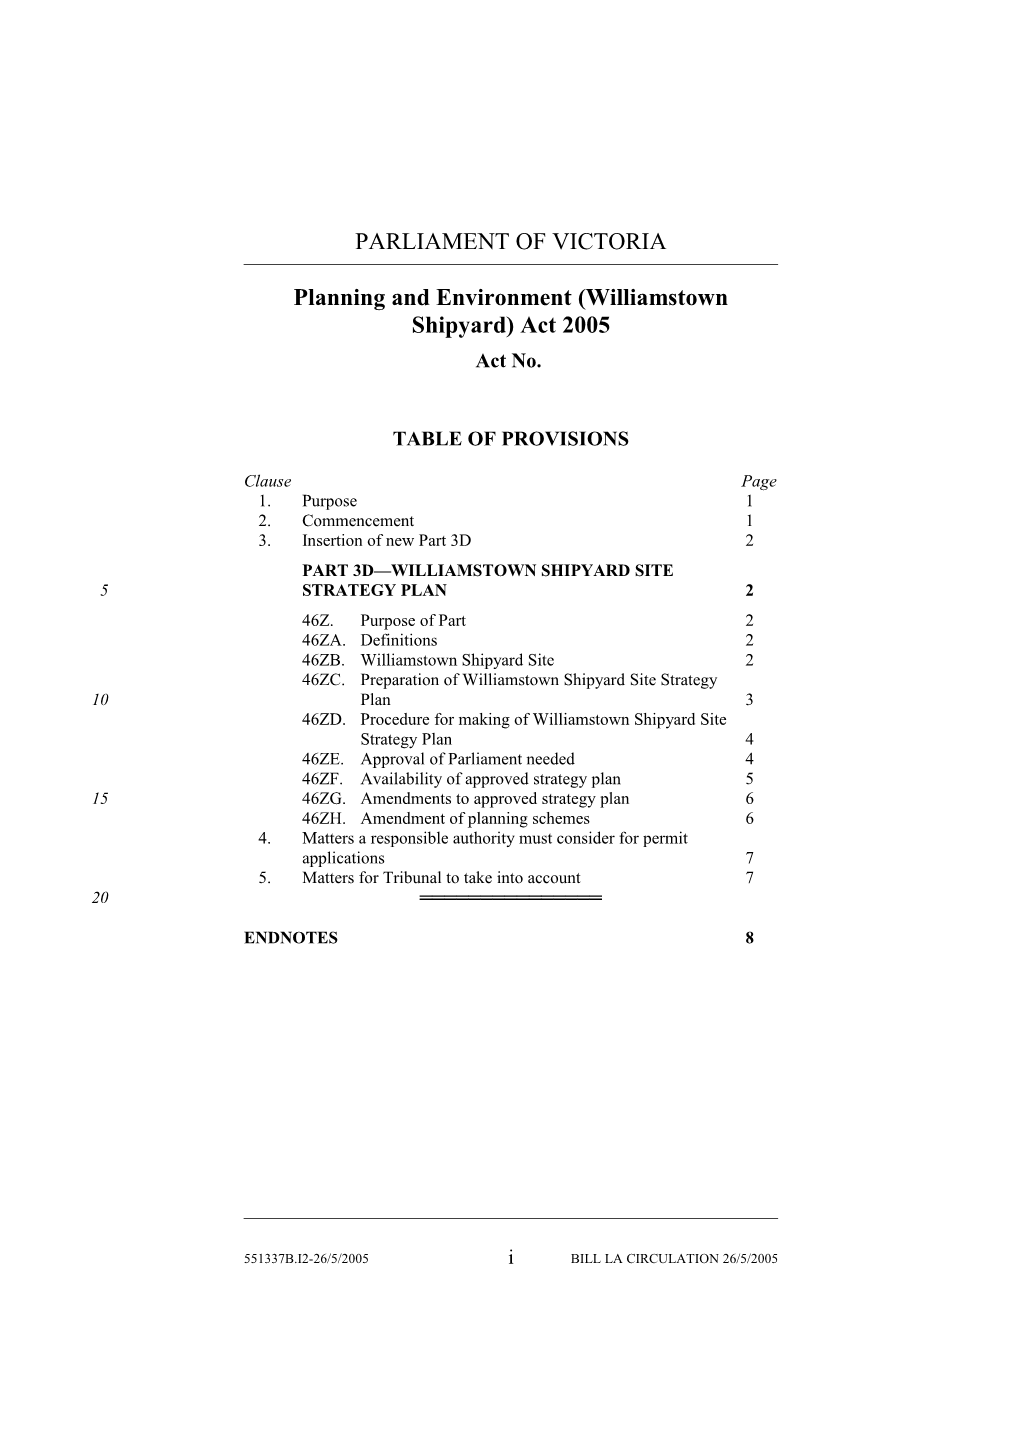 Planning and Environment (Williamstown Shipyard) Act 2005